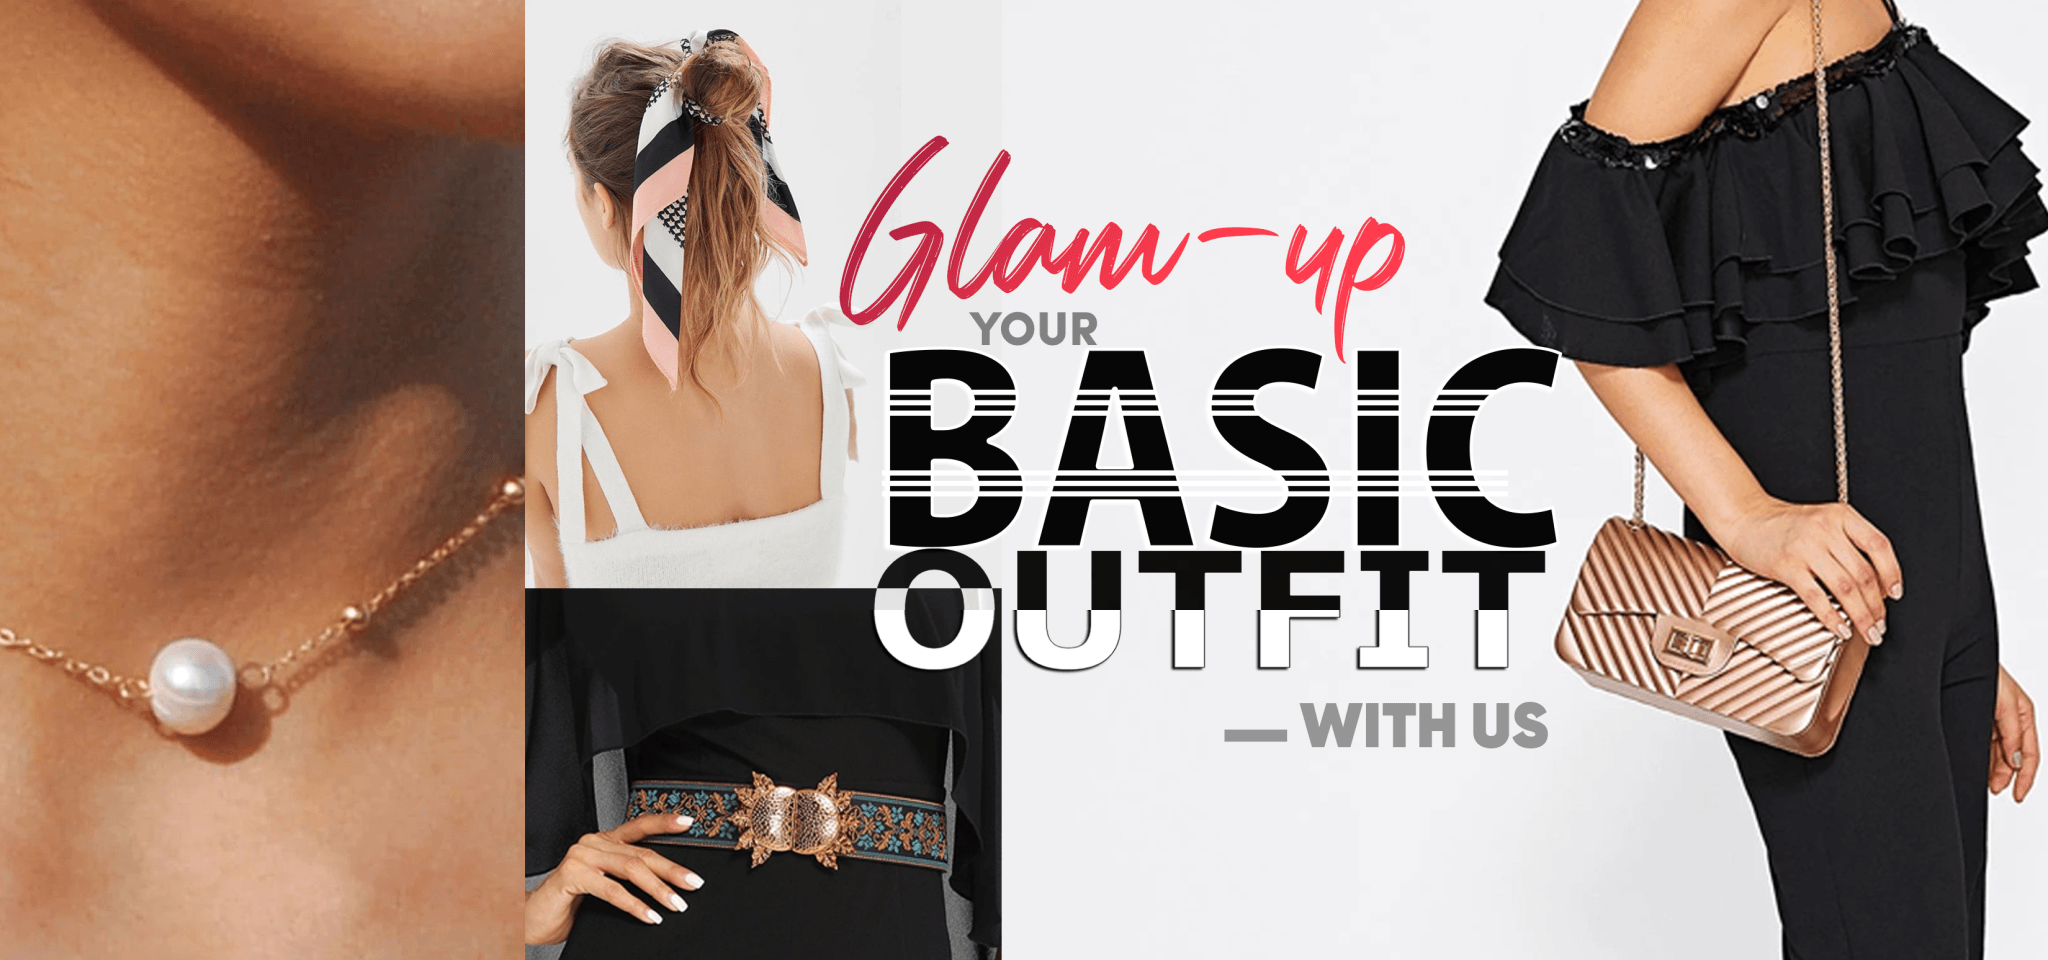 GLAM-UP YOUR BASIC OUTFIT WITH US - Negative Apparel